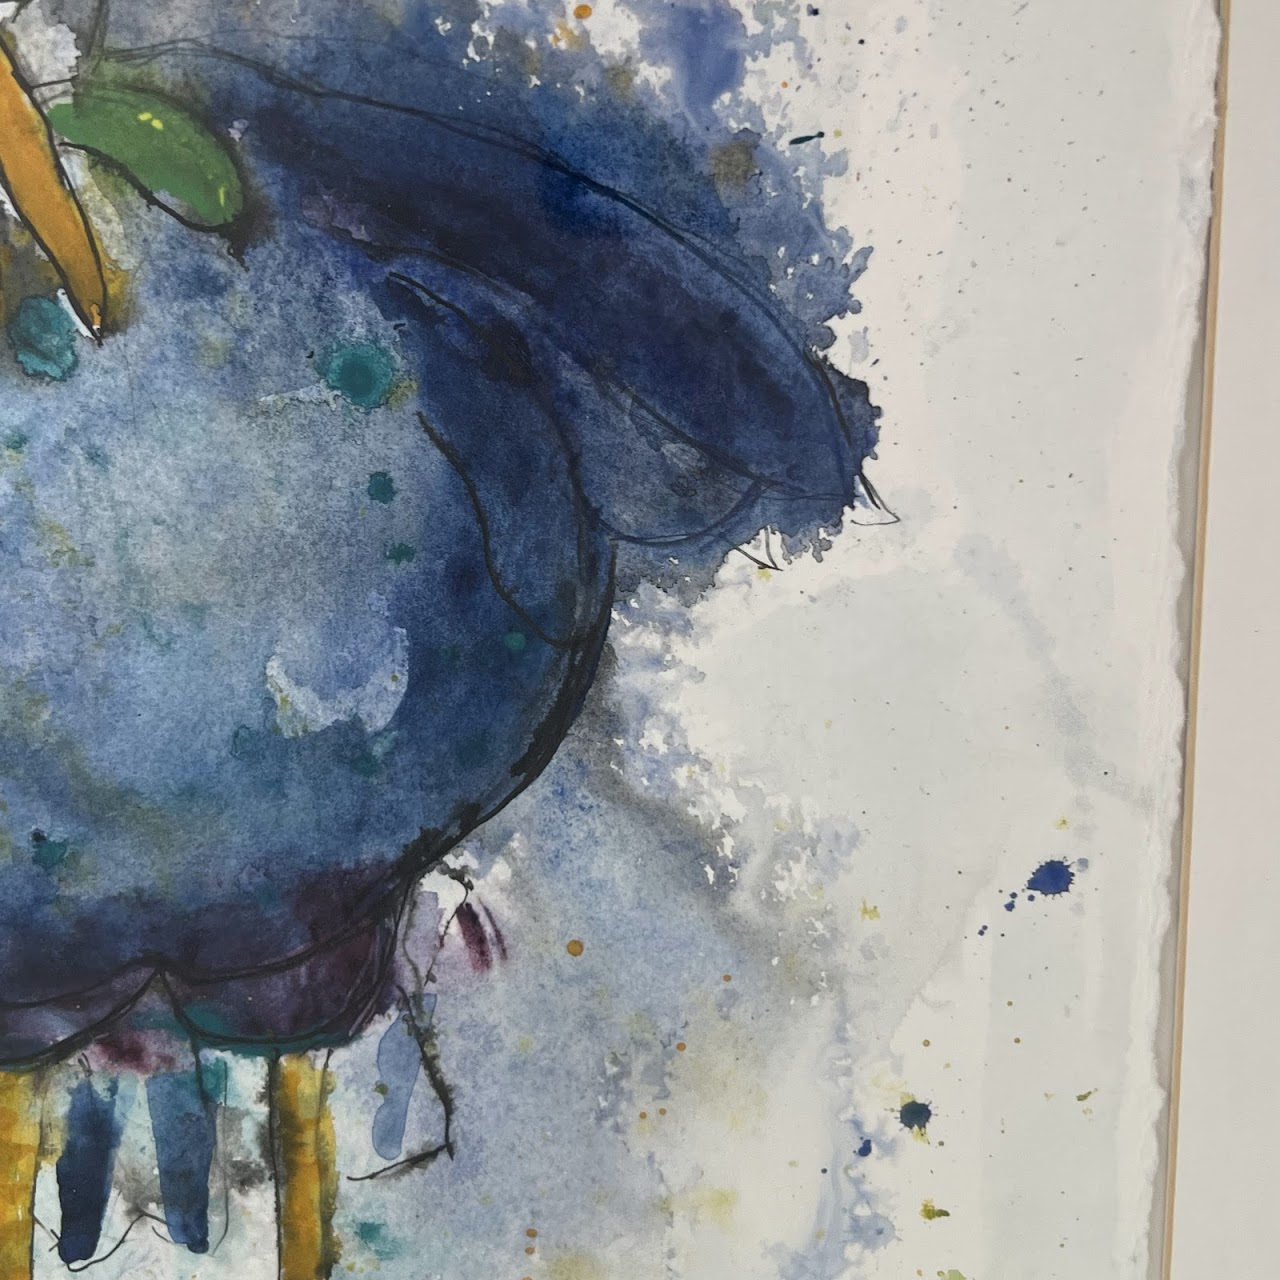 Leah McCloskey 'The Early Bird' Signed Acrylic and Ink Painting